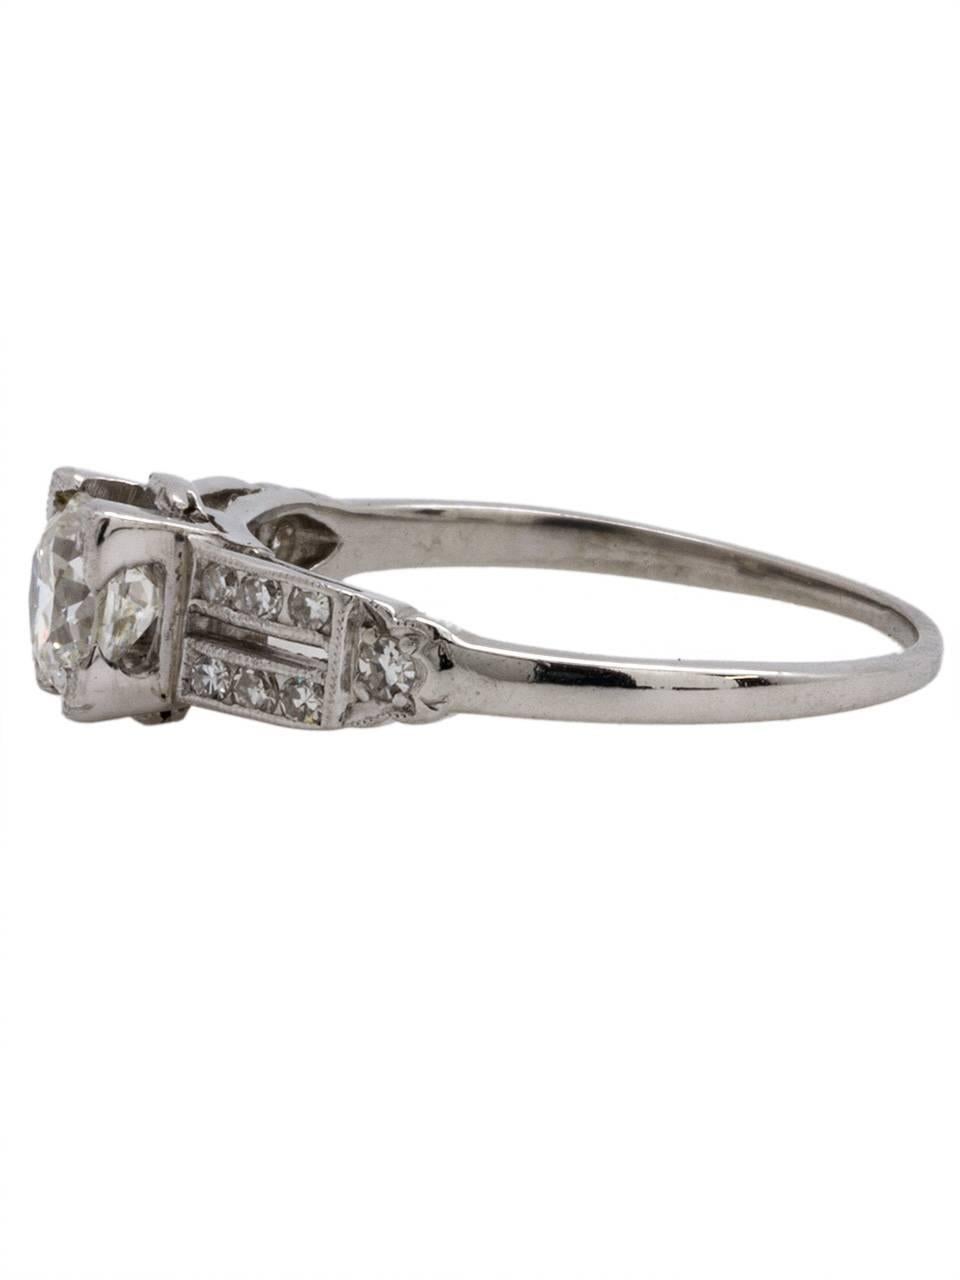 Gorgeous Art Deco 1930s platinum diamond engagement ring, set with very bright and lively EGL certified .68ct round transitional cut center diamond rated G color (near colorless),exceptional VS1 clarity. Two rows of bead set side diamonds with